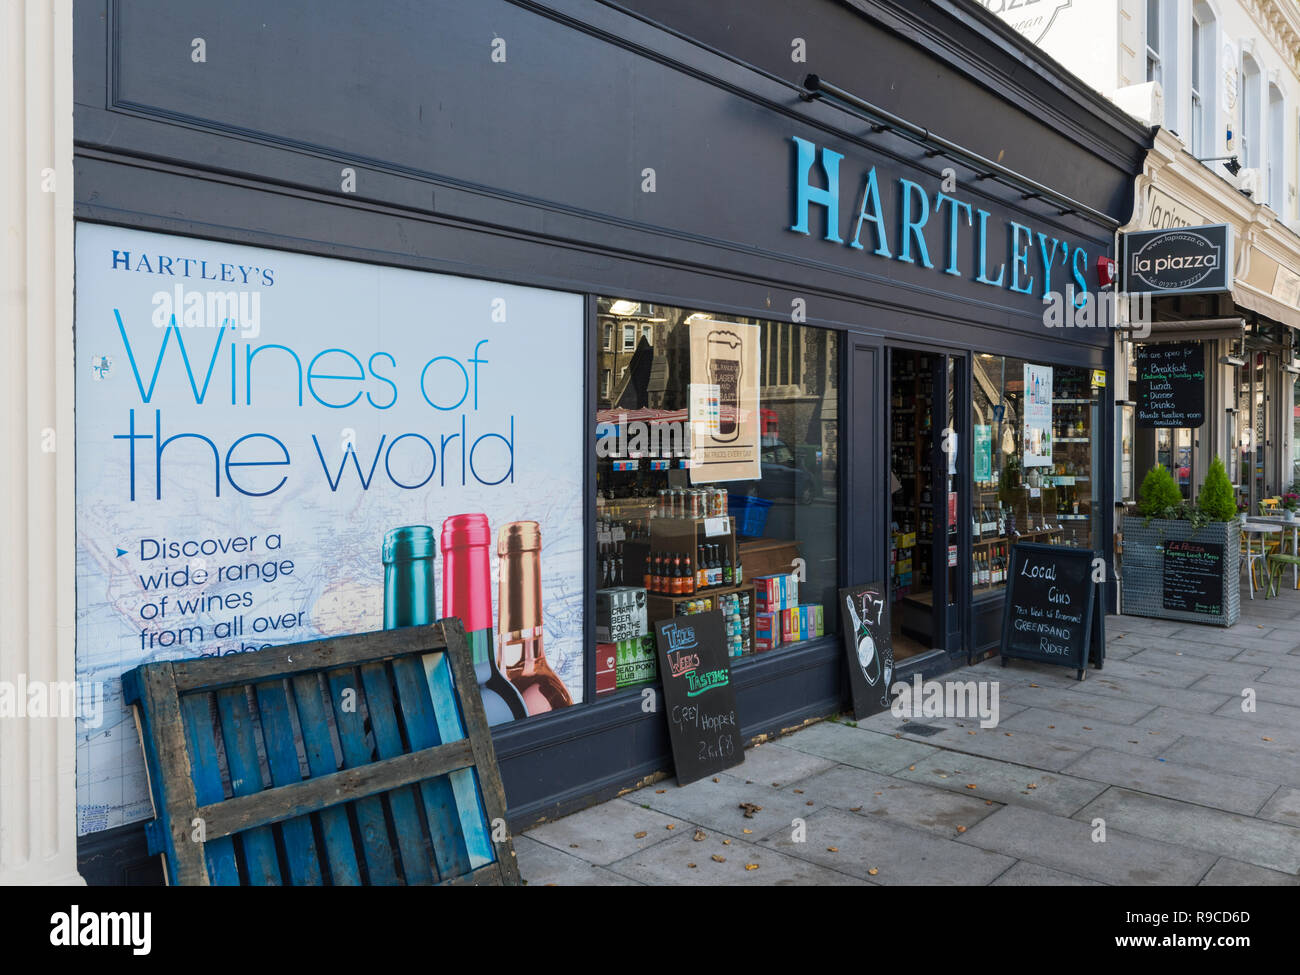 Hartley's Wine shop front entrance in Brighton, East Sussex, England, UK. Retail store. Stock Photo